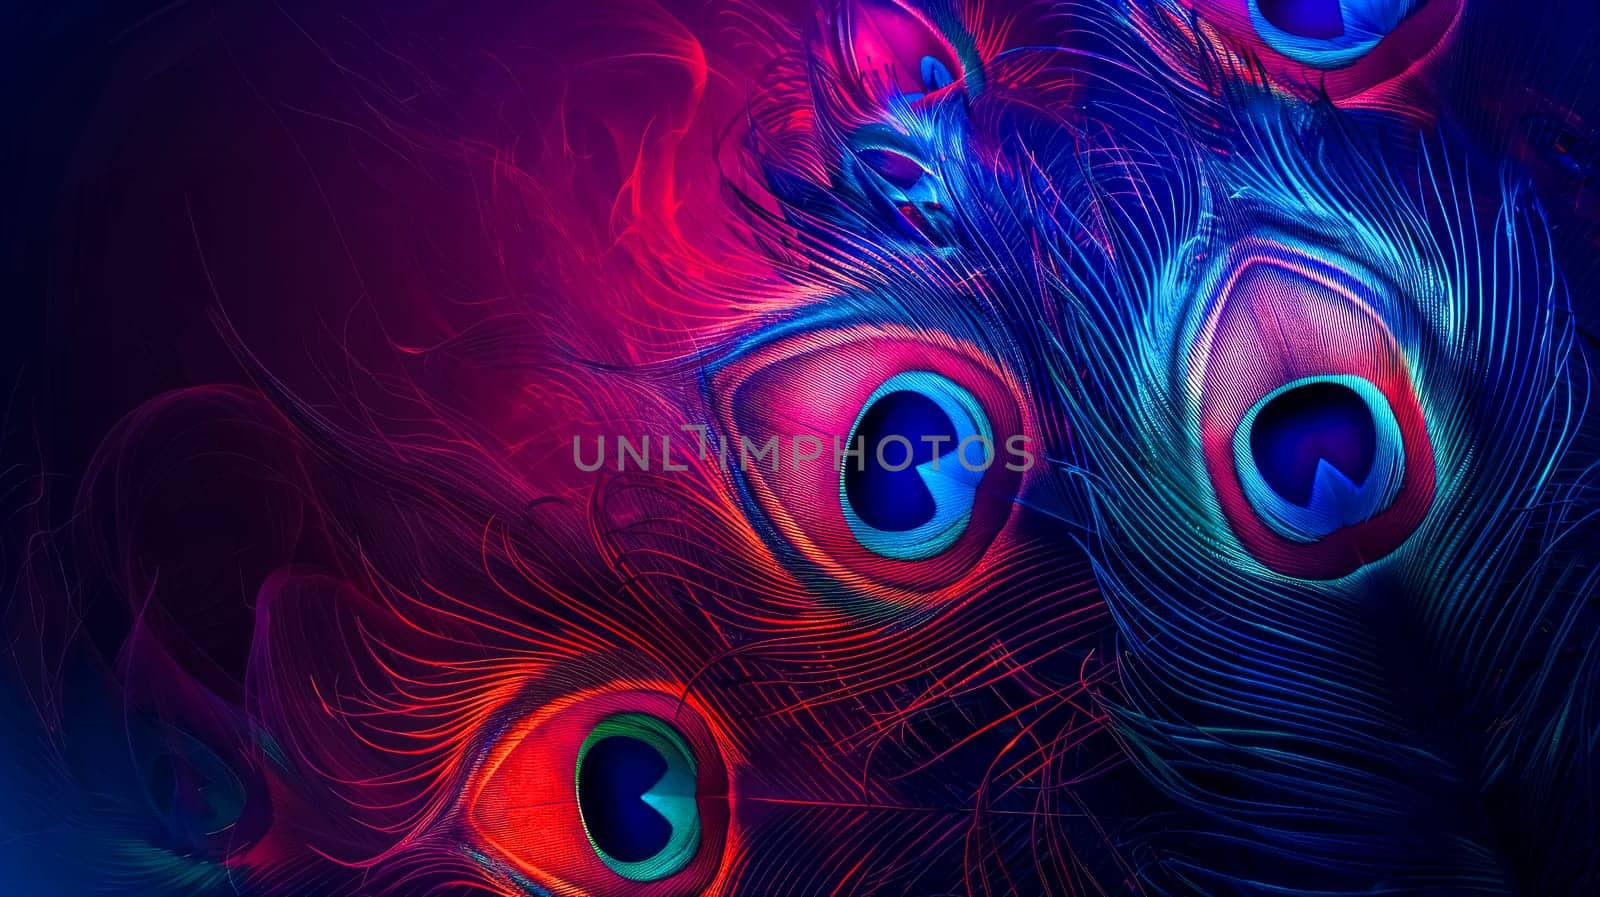 Colorful abstract texture of illuminated peacock feathers with vivid hues